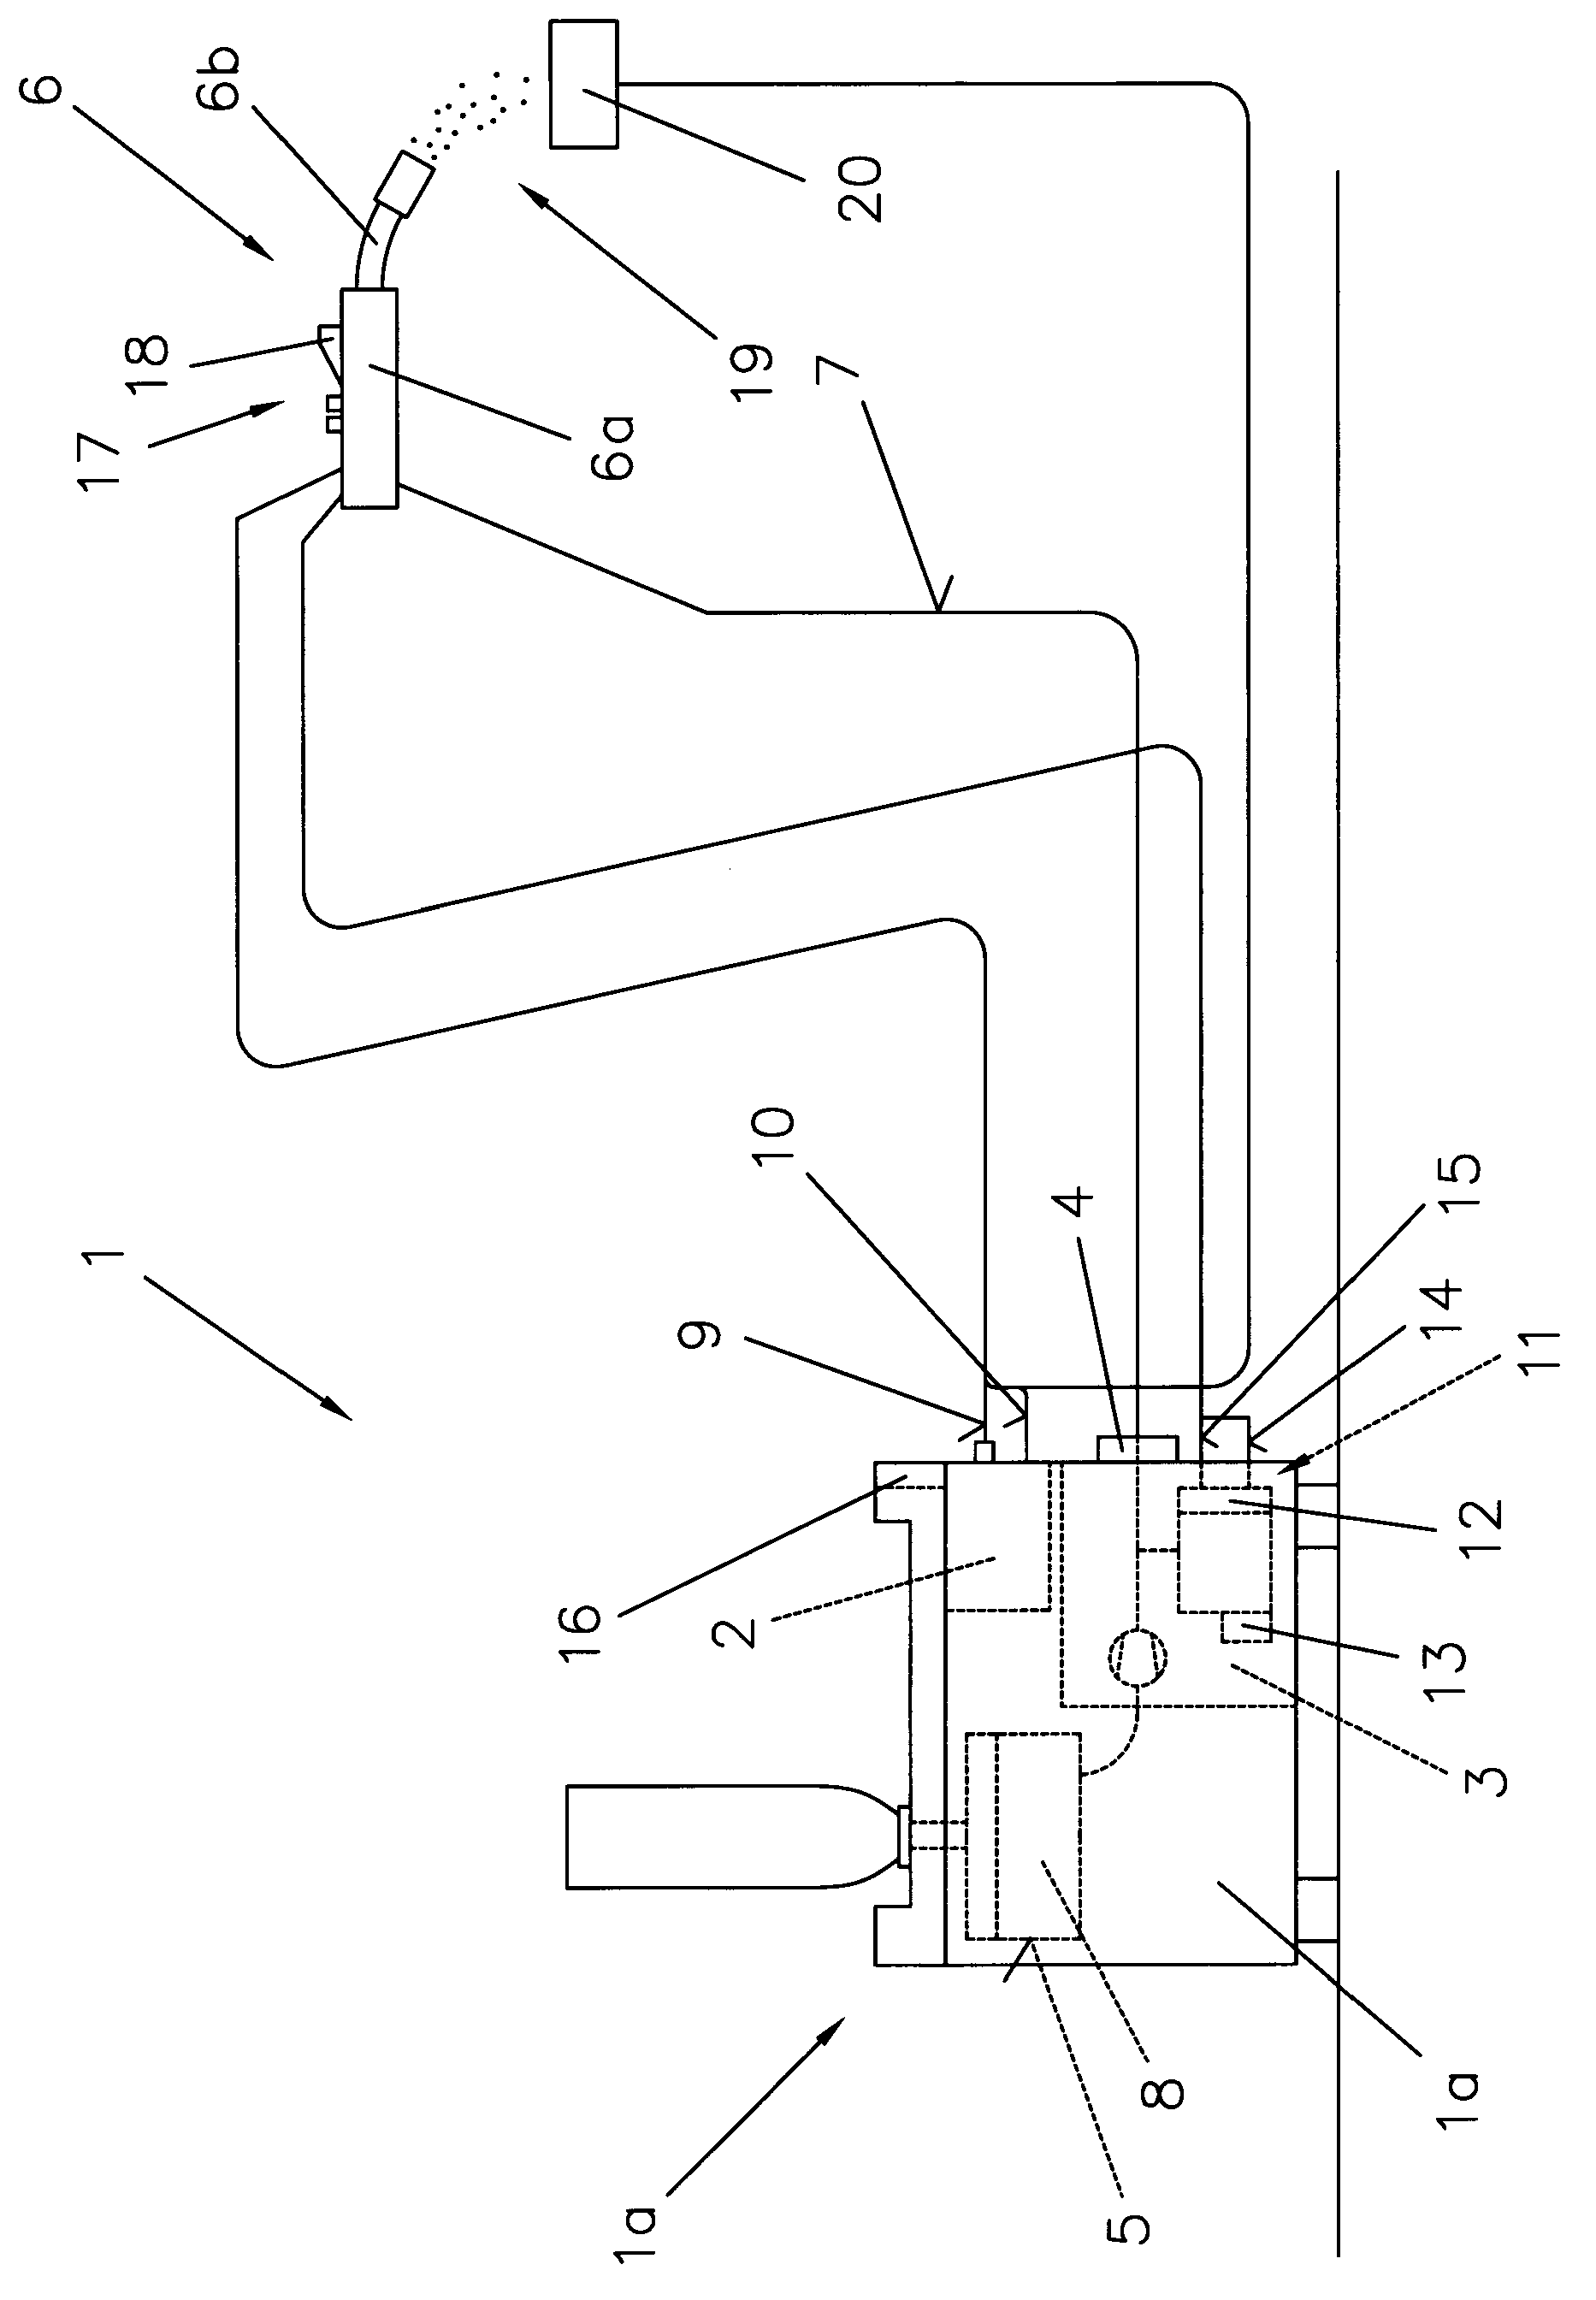 Heating element, steam cutting device, and burner of a power-enerating device